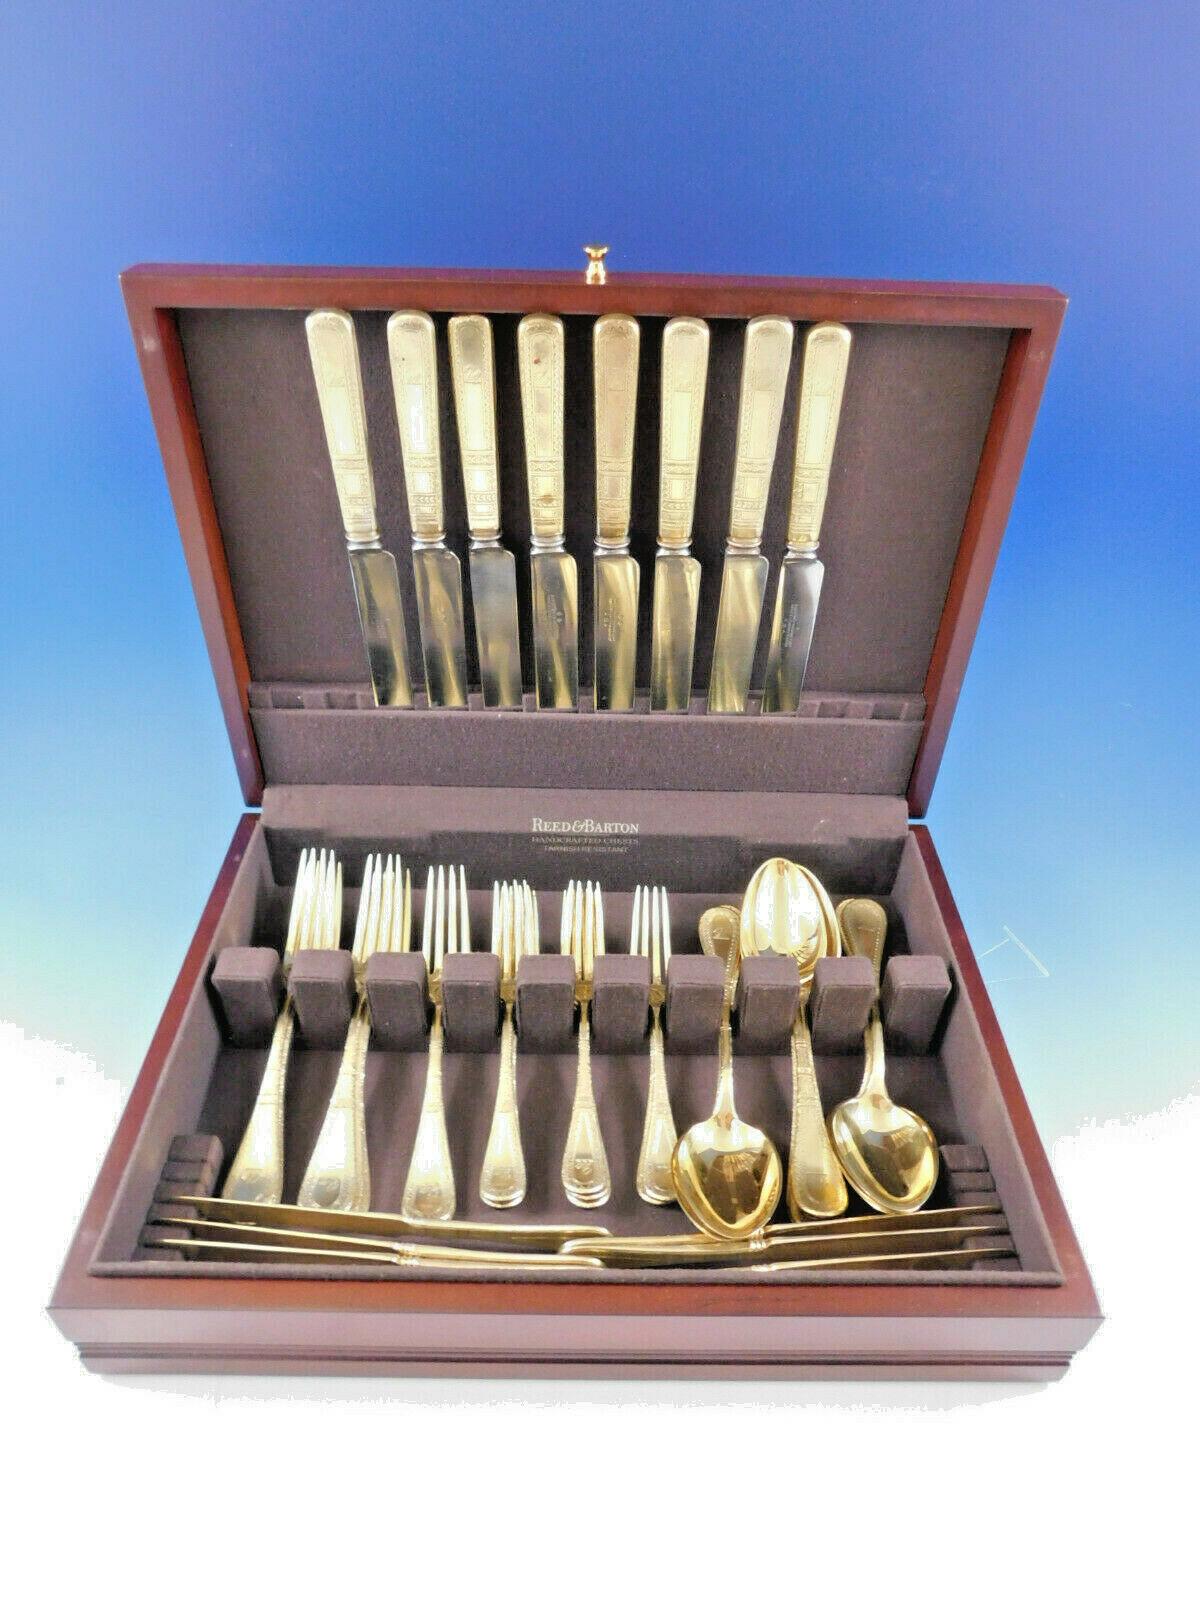 Dinner size King William Engraved Vermeil by Tiffany & Co. sterling silver flatware set of 88 pieces. This set is vermeil (completely gold-washed) and includes:

8 dinner size knives w/blunt stainless blades, 10 3/4